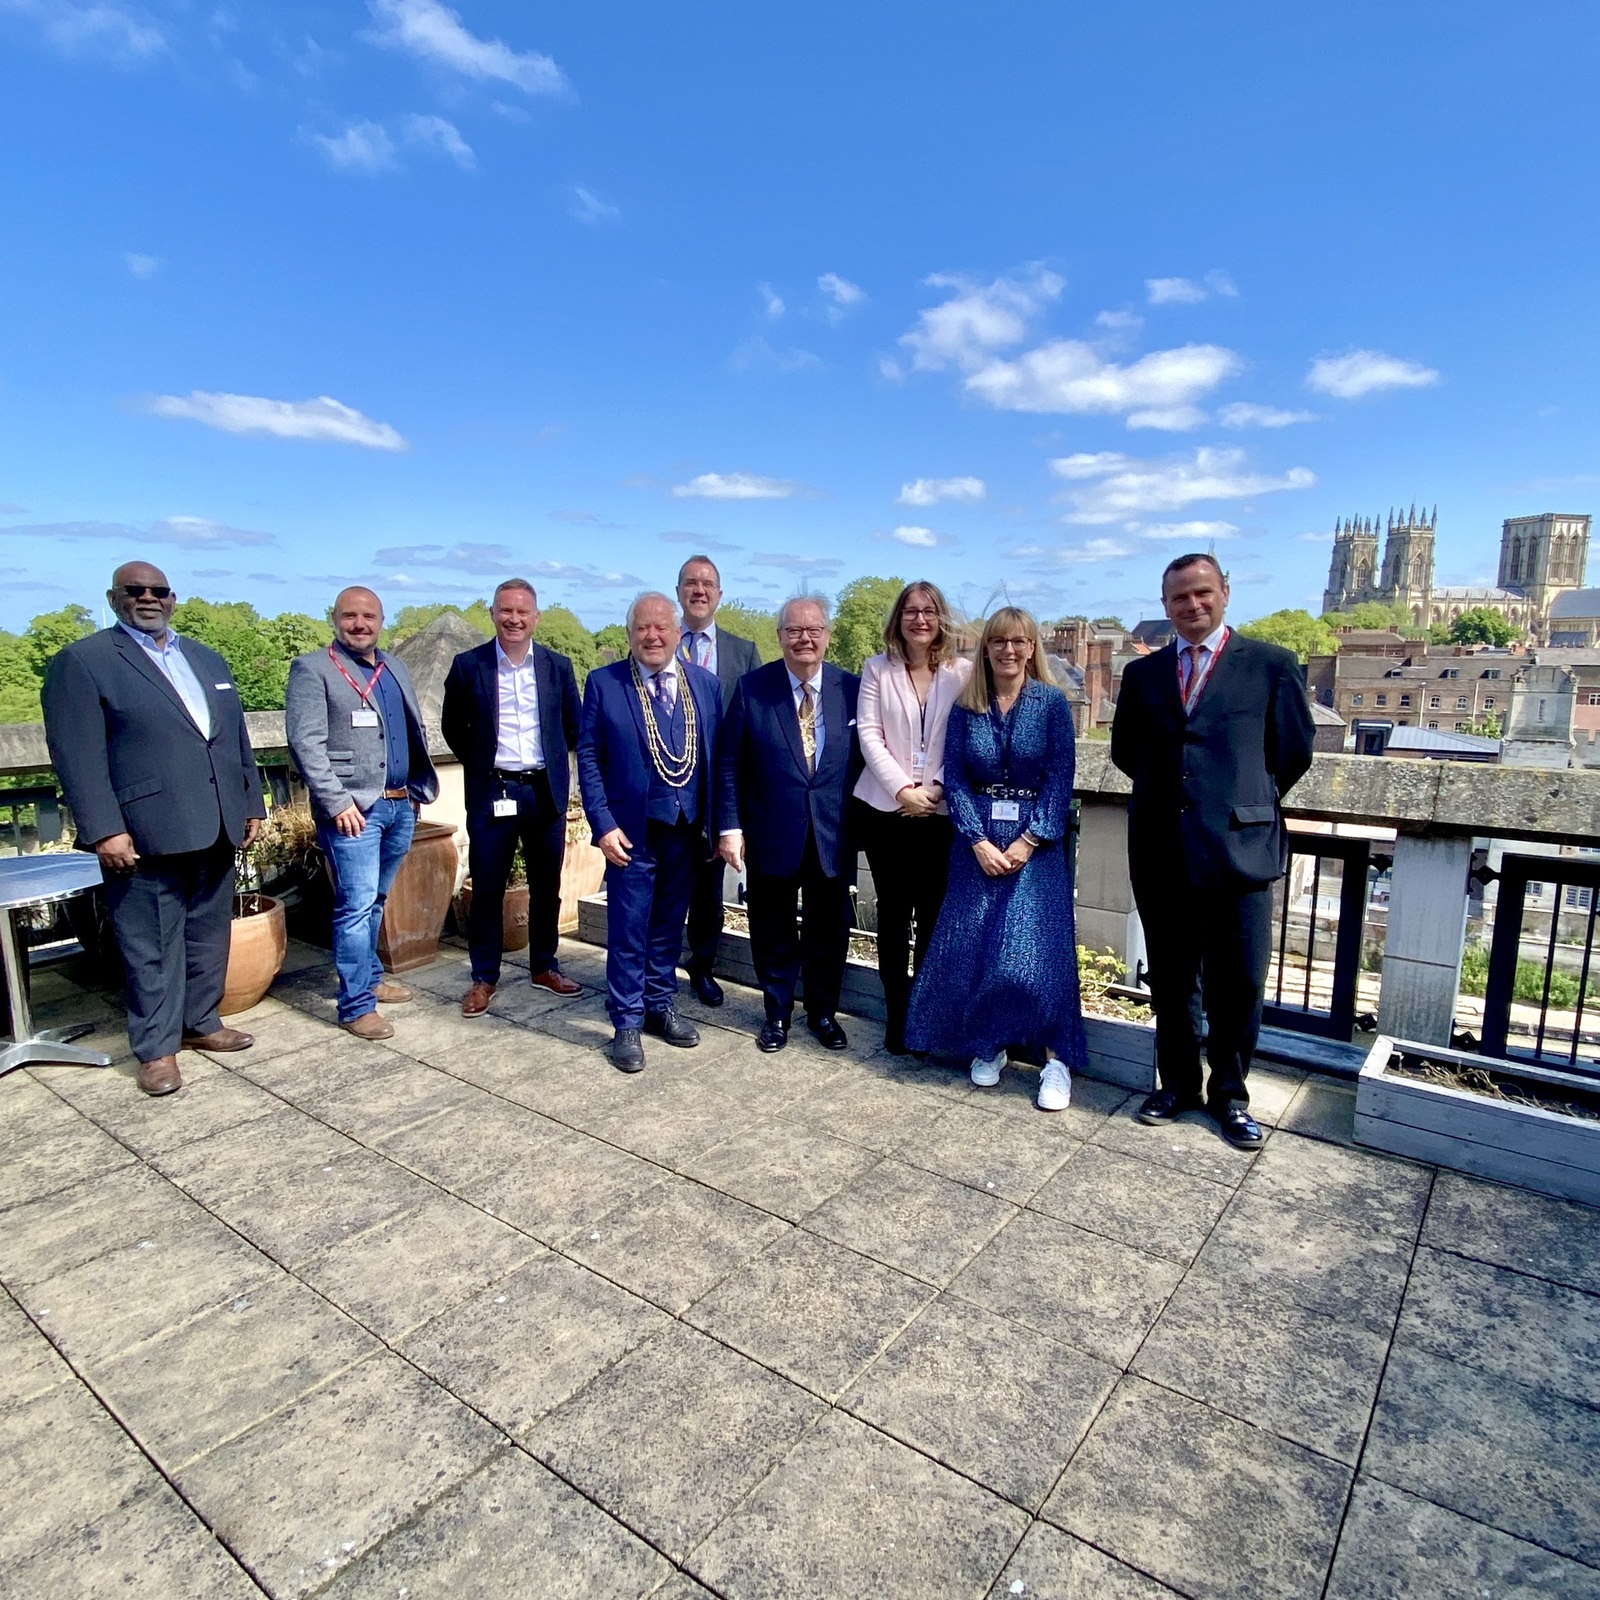 2 June 2023 - Day 3 of York Trip - Great to meet with the senior team from Aviva York  - great photo opportunity on the terrace of Aviva’s HQ building with its stunning view over the City of York. Wow!